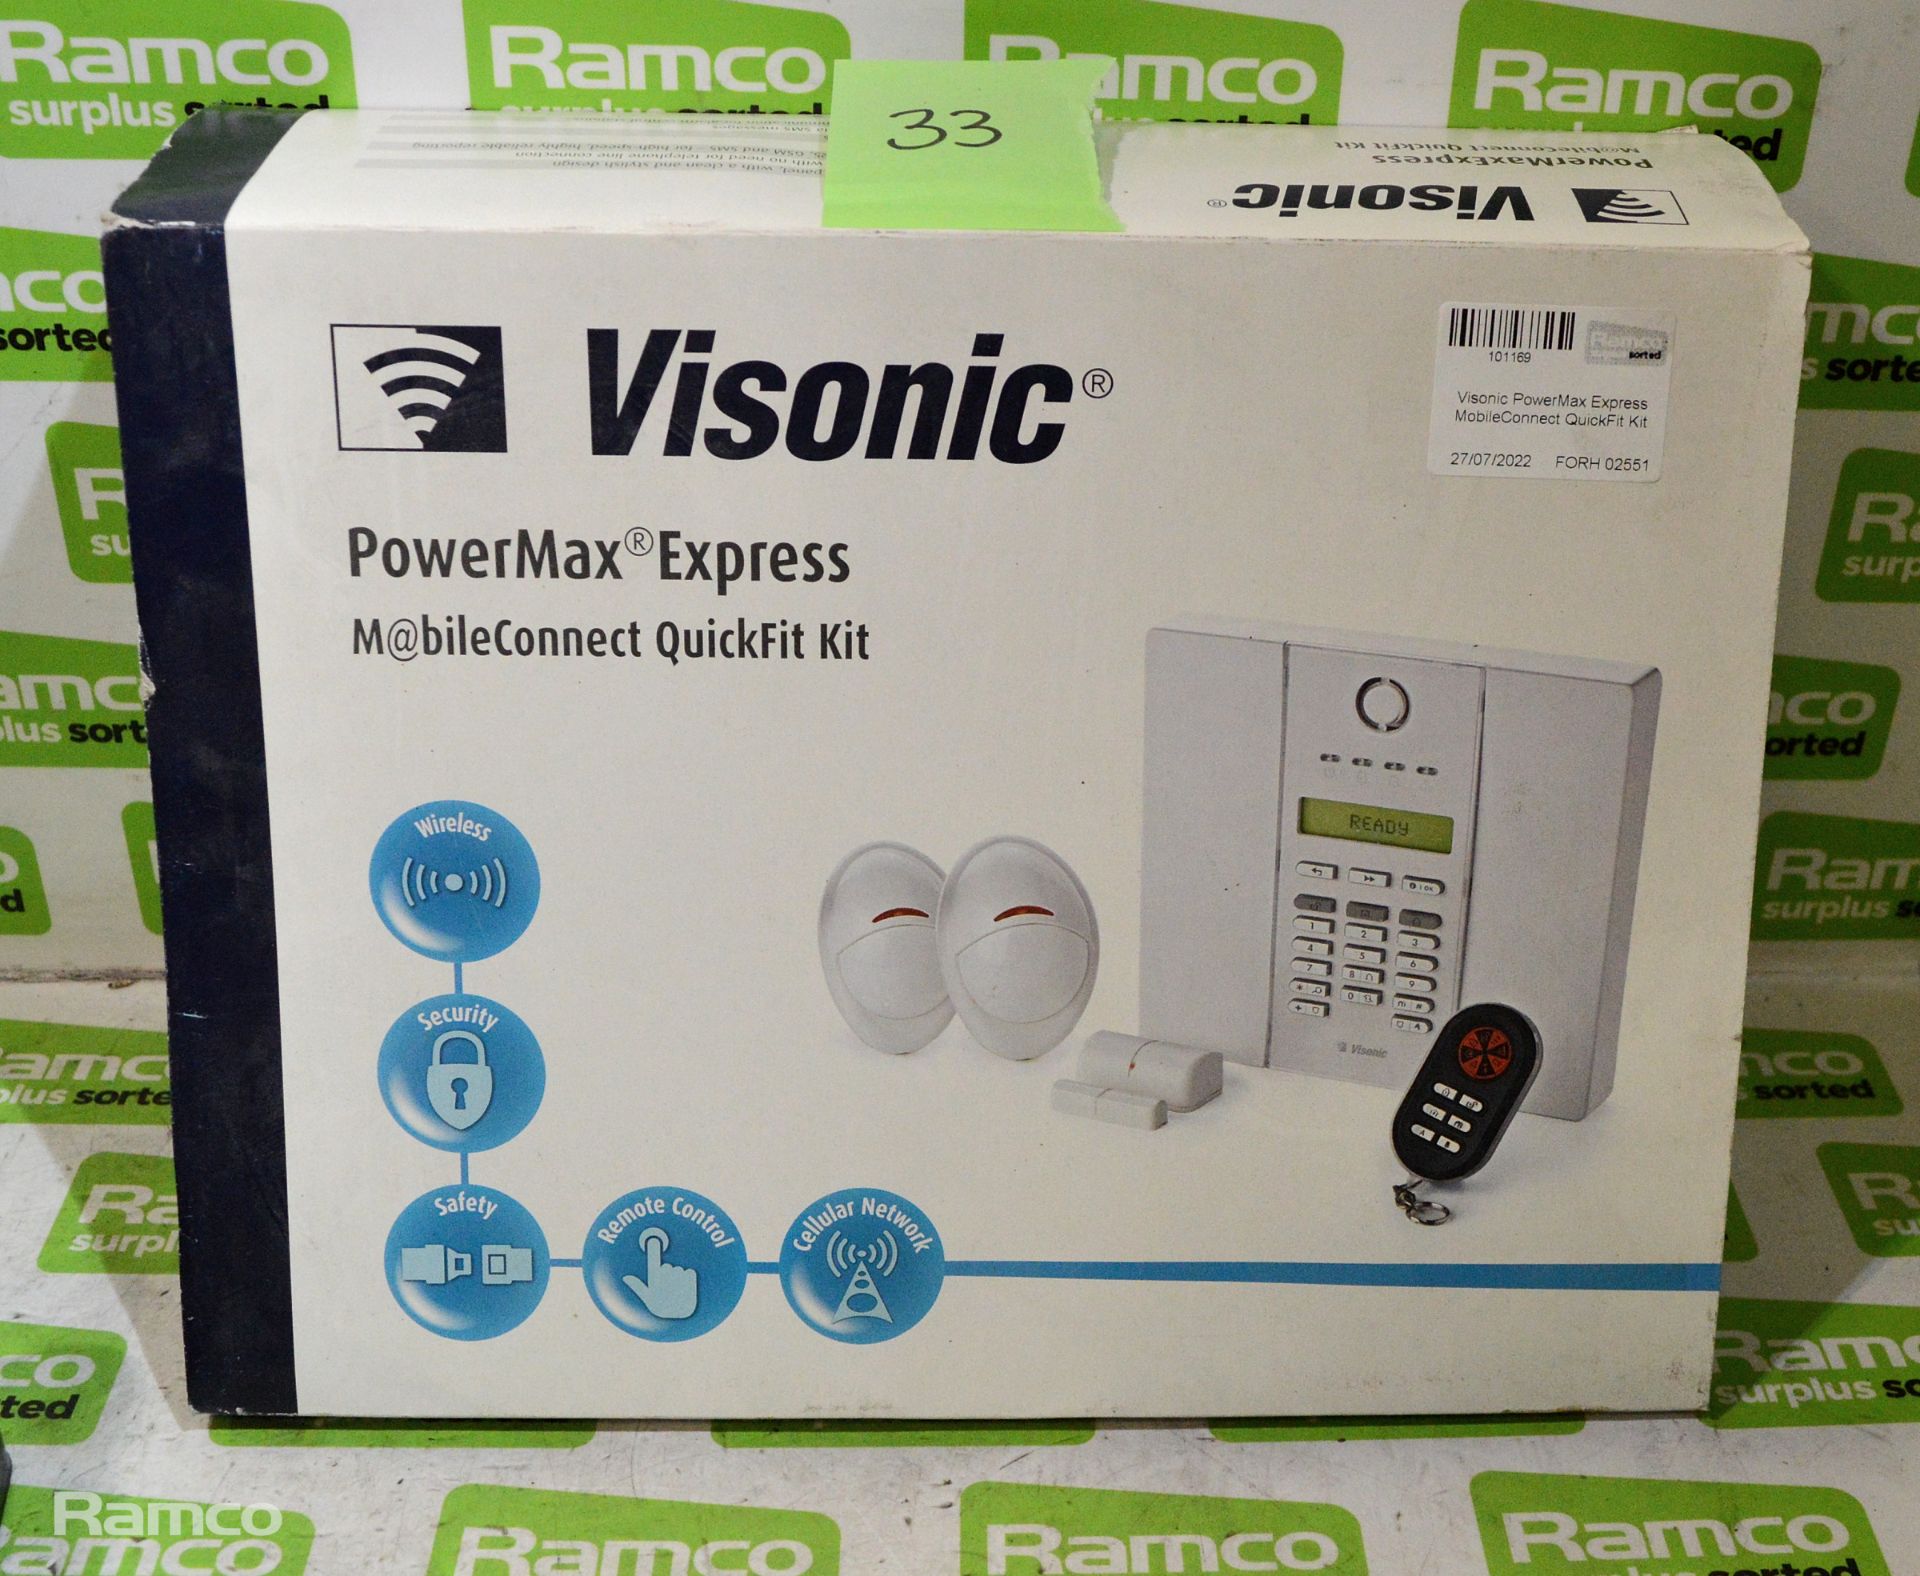 Visonic PowerMax Express MobileConnect QuickFit Kit - Image 5 of 5